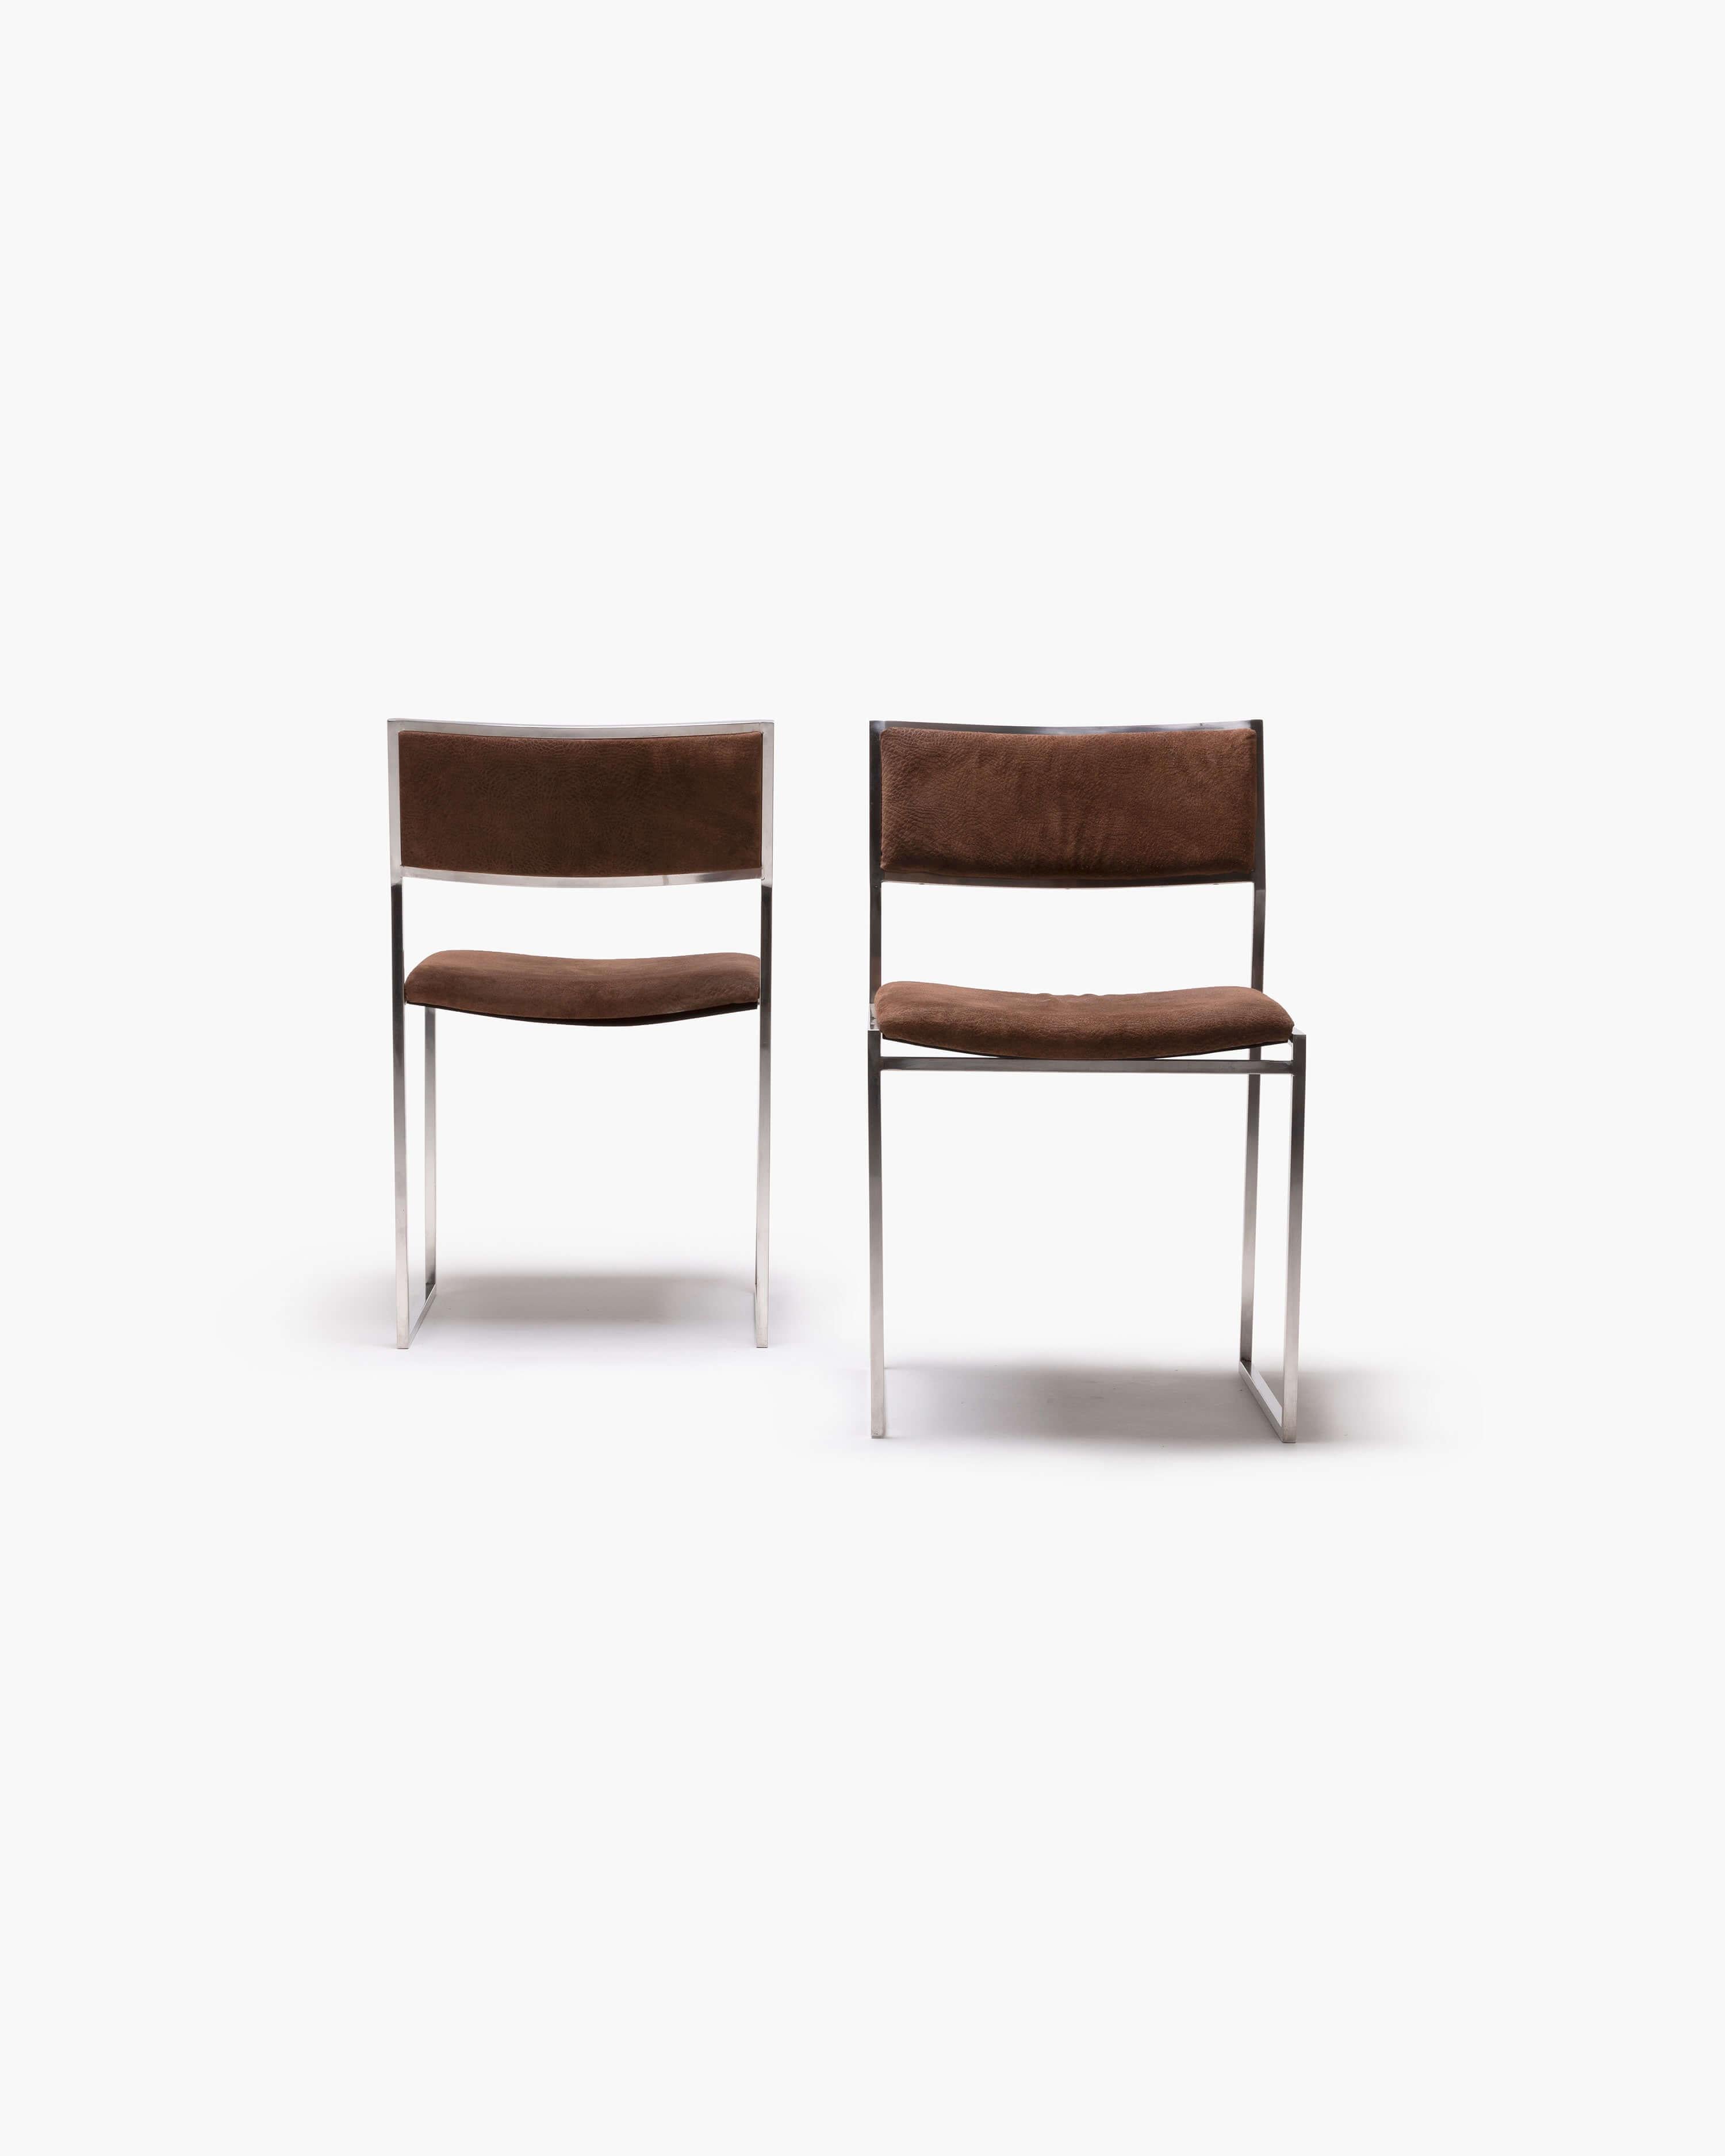 Experience the iconic design of Willy Rizzo with this exceptional pair of SQ chairs. Crafted in 1970, these chairs boast a striking stainless steel structure that exudes contemporary elegance. The statement upholstery of darkly tanned peccary